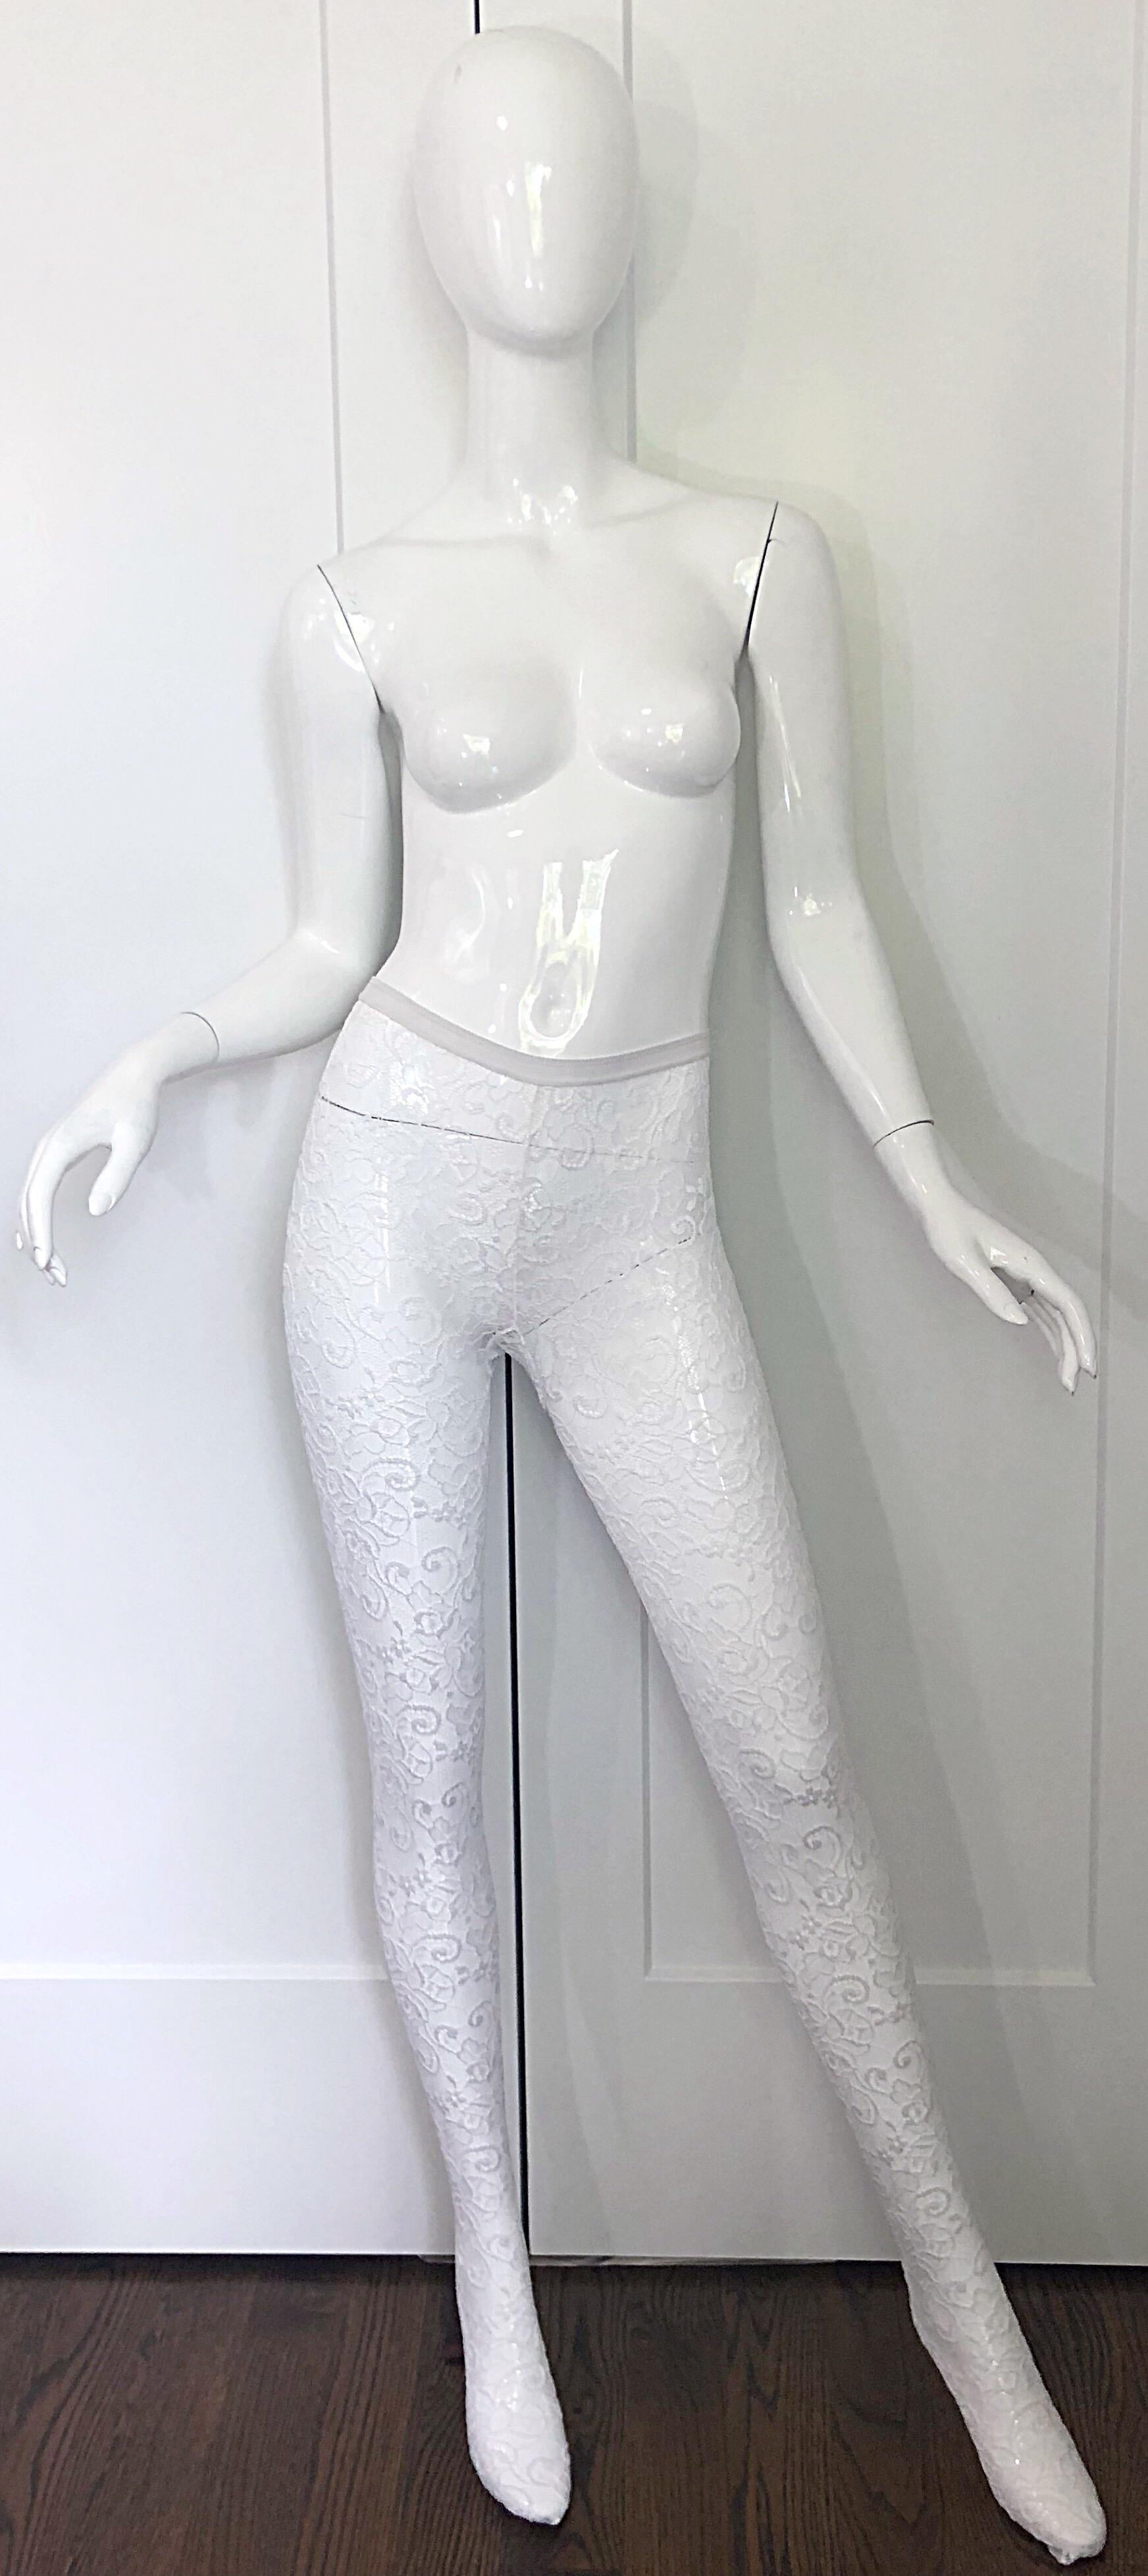 Brand new never worn early 1990s GIANNI VERSACE stark white lace pantyhose / leggings / stockings! A definite statement maker that would look great with a dress, skirt, or even shorts. In great unworn condition. Made in Italy
Marked Size 40 / US 6,